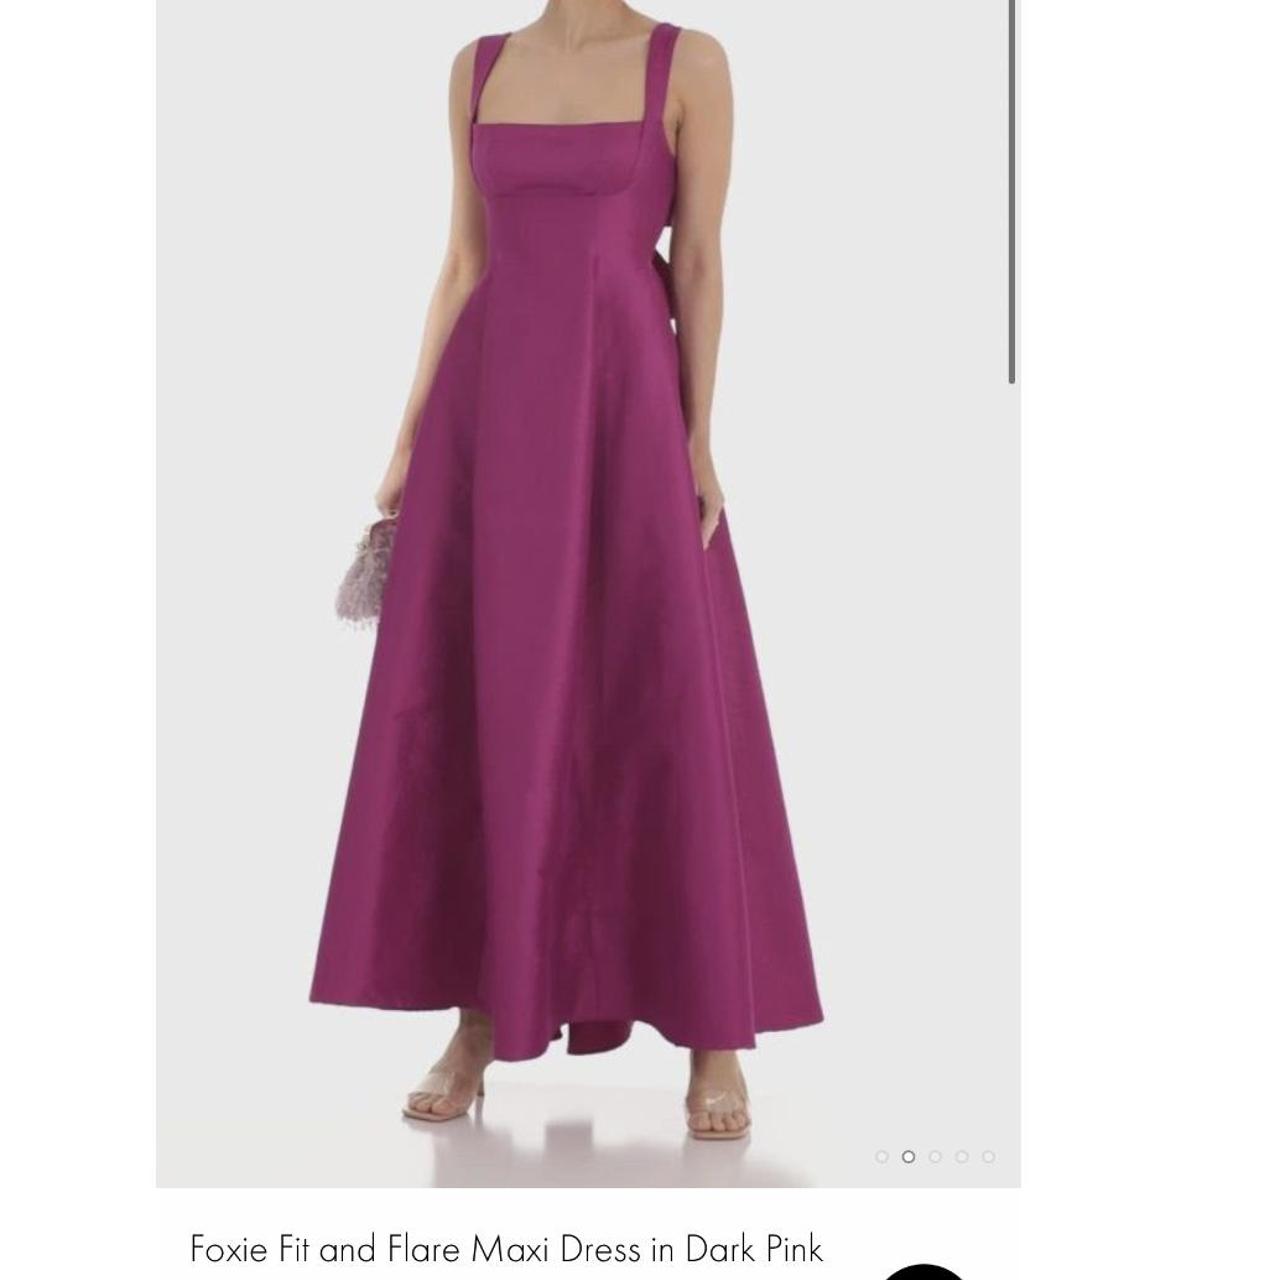 Foxie Fit and Flare Maxi Dress in Dark Pink